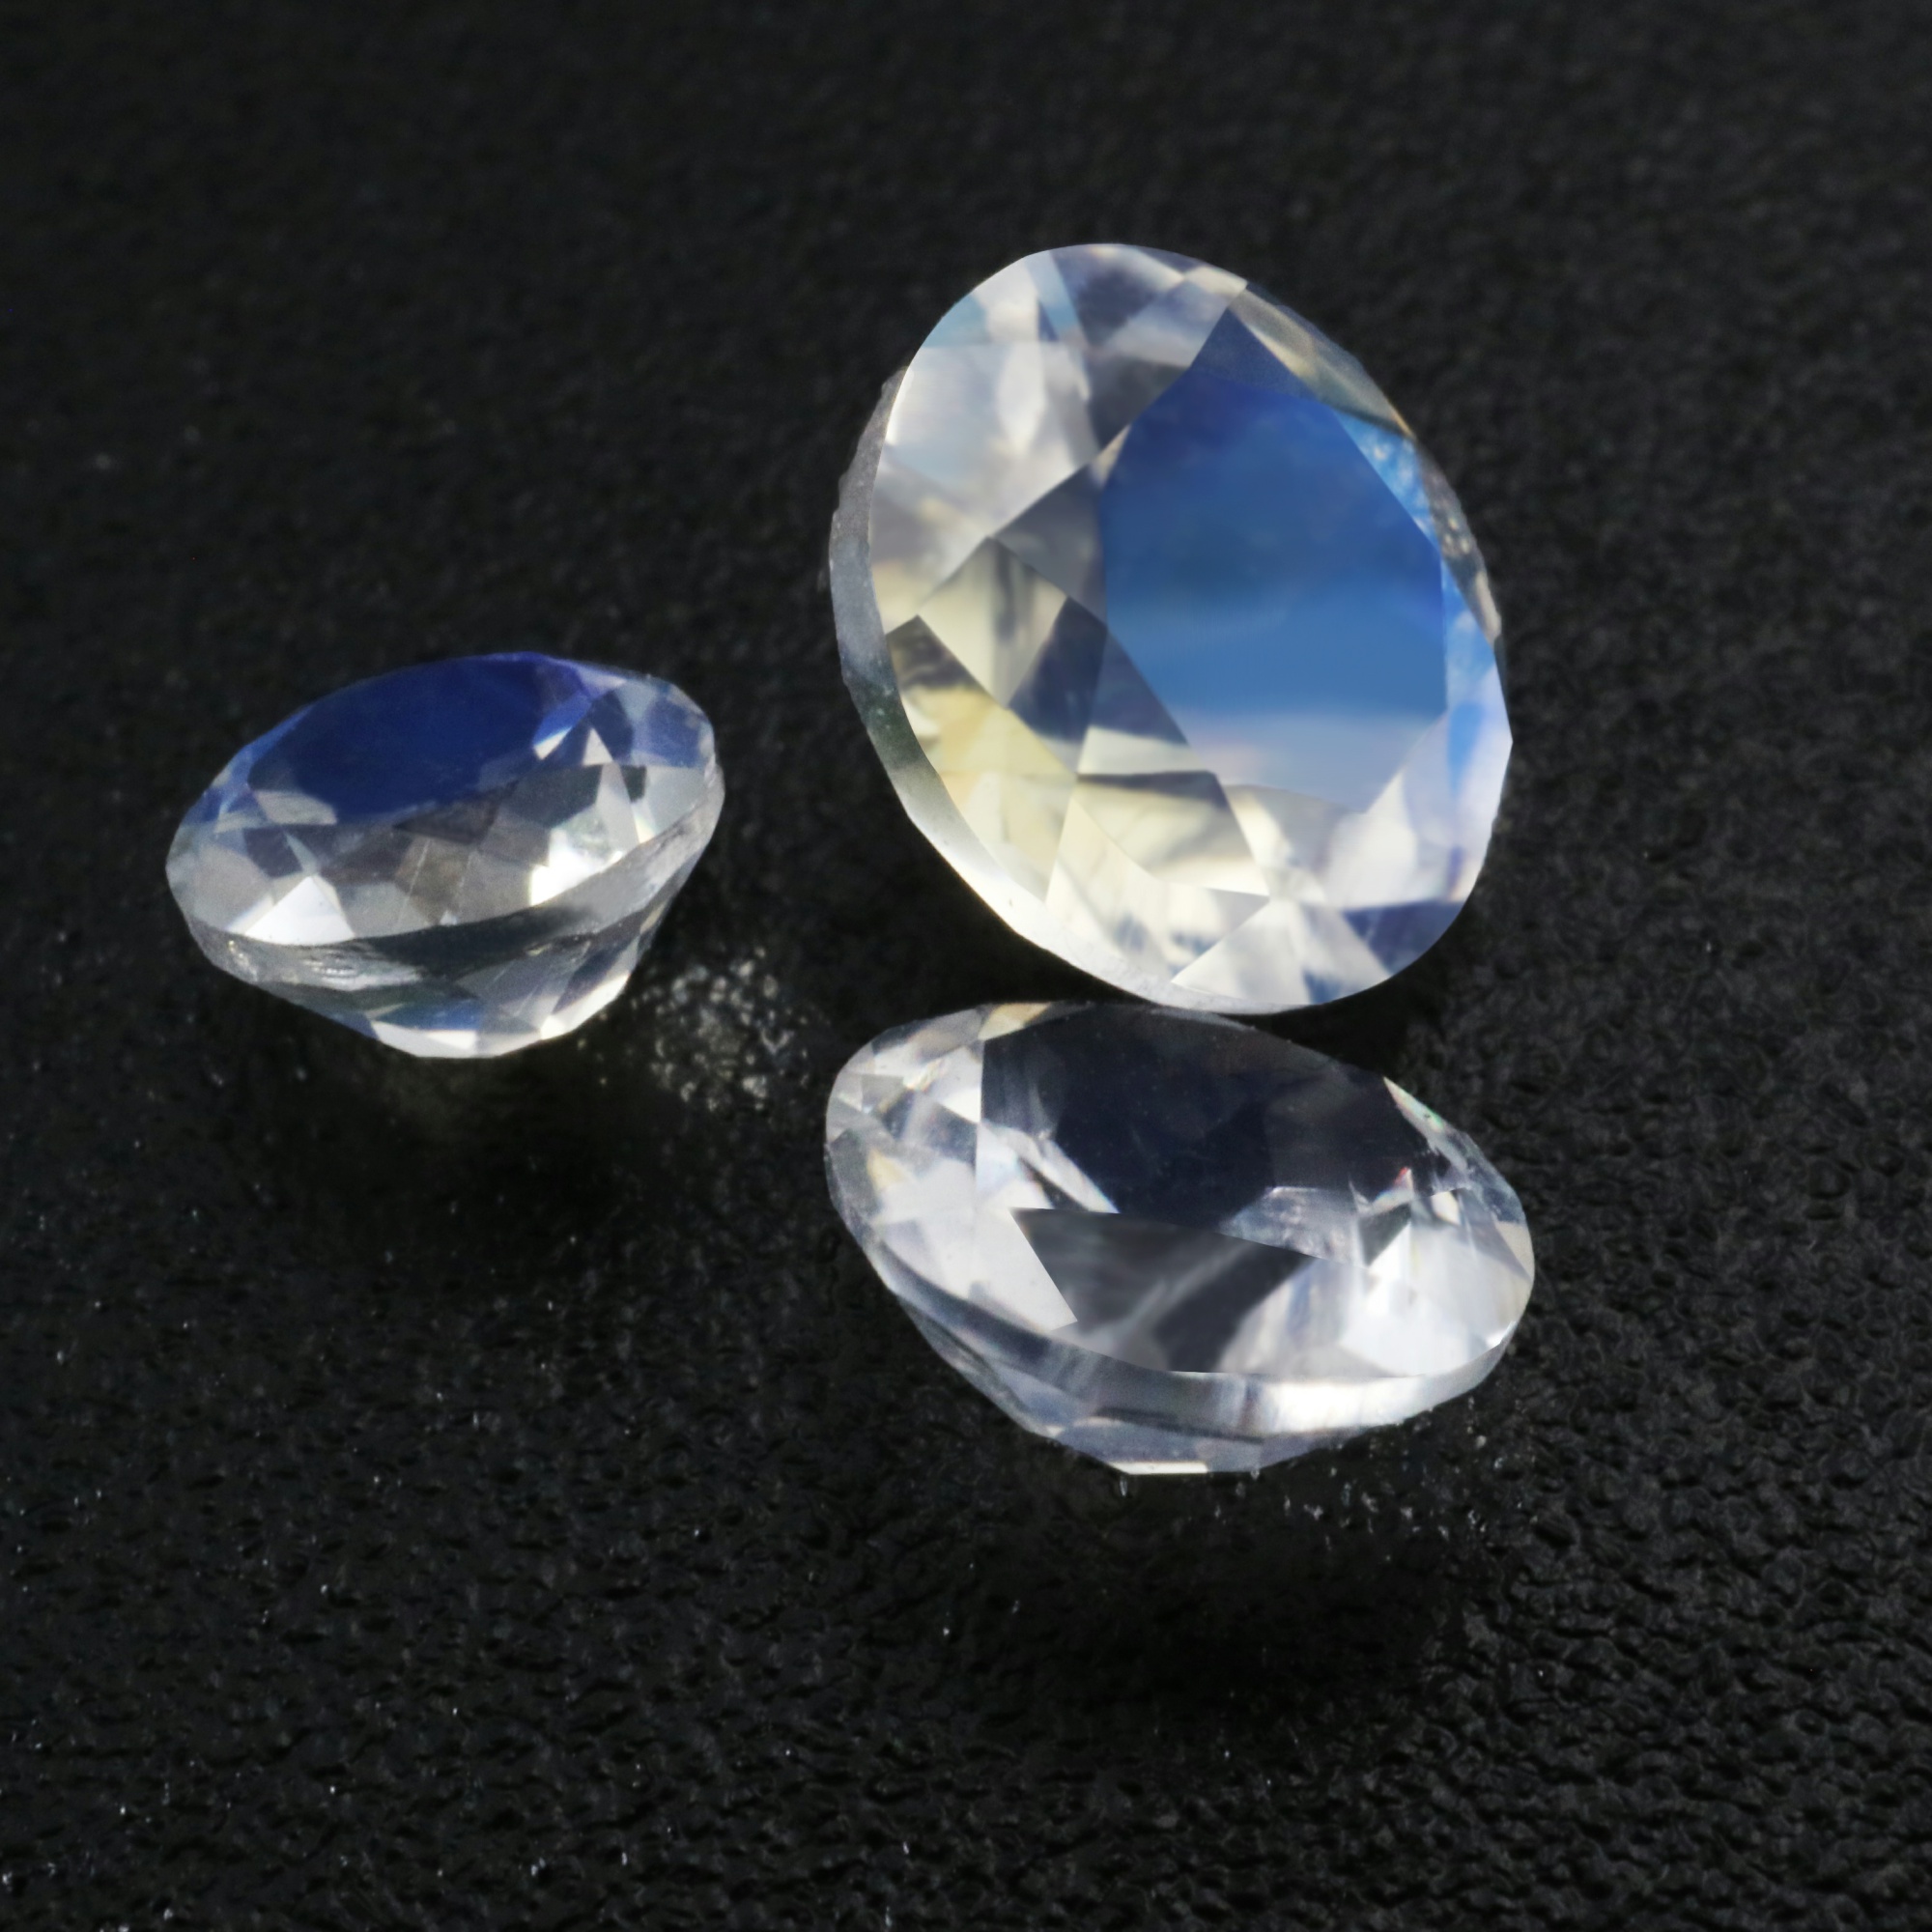 1Pcs Round Blue Moonstone June Birthstone Faceted Cut AAA Grade Loose Gemstone Natural Semi Precious Stone DIY Jewelry Supplies 4110174 - Click Image to Close